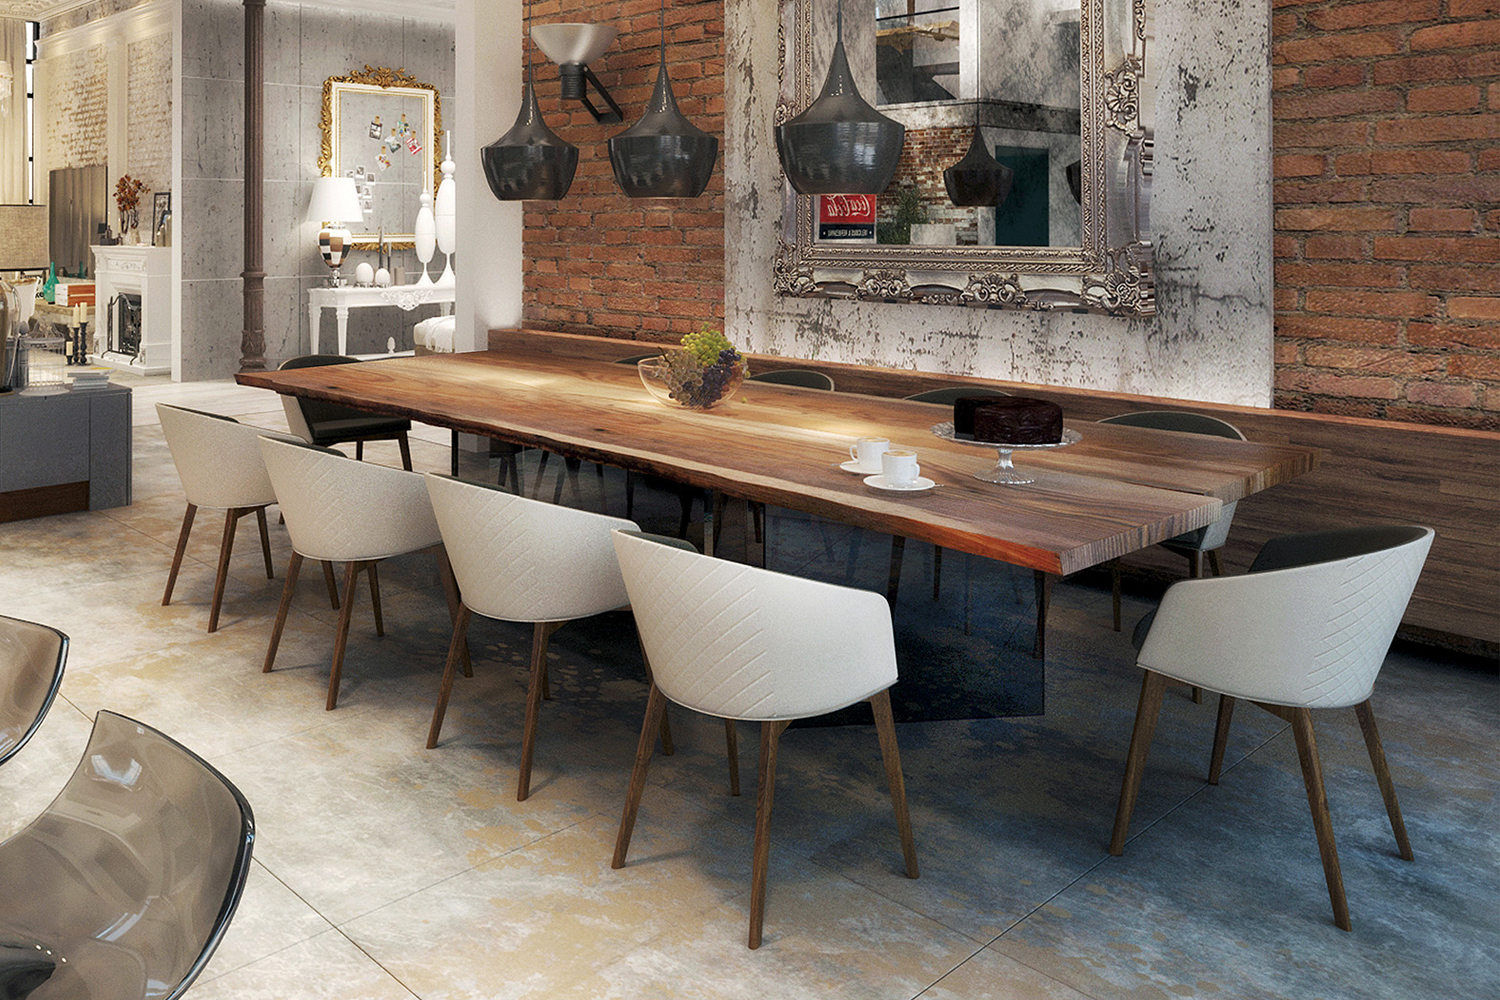 Luxury Dining Room Sets, Modern Round Tables And Chairs